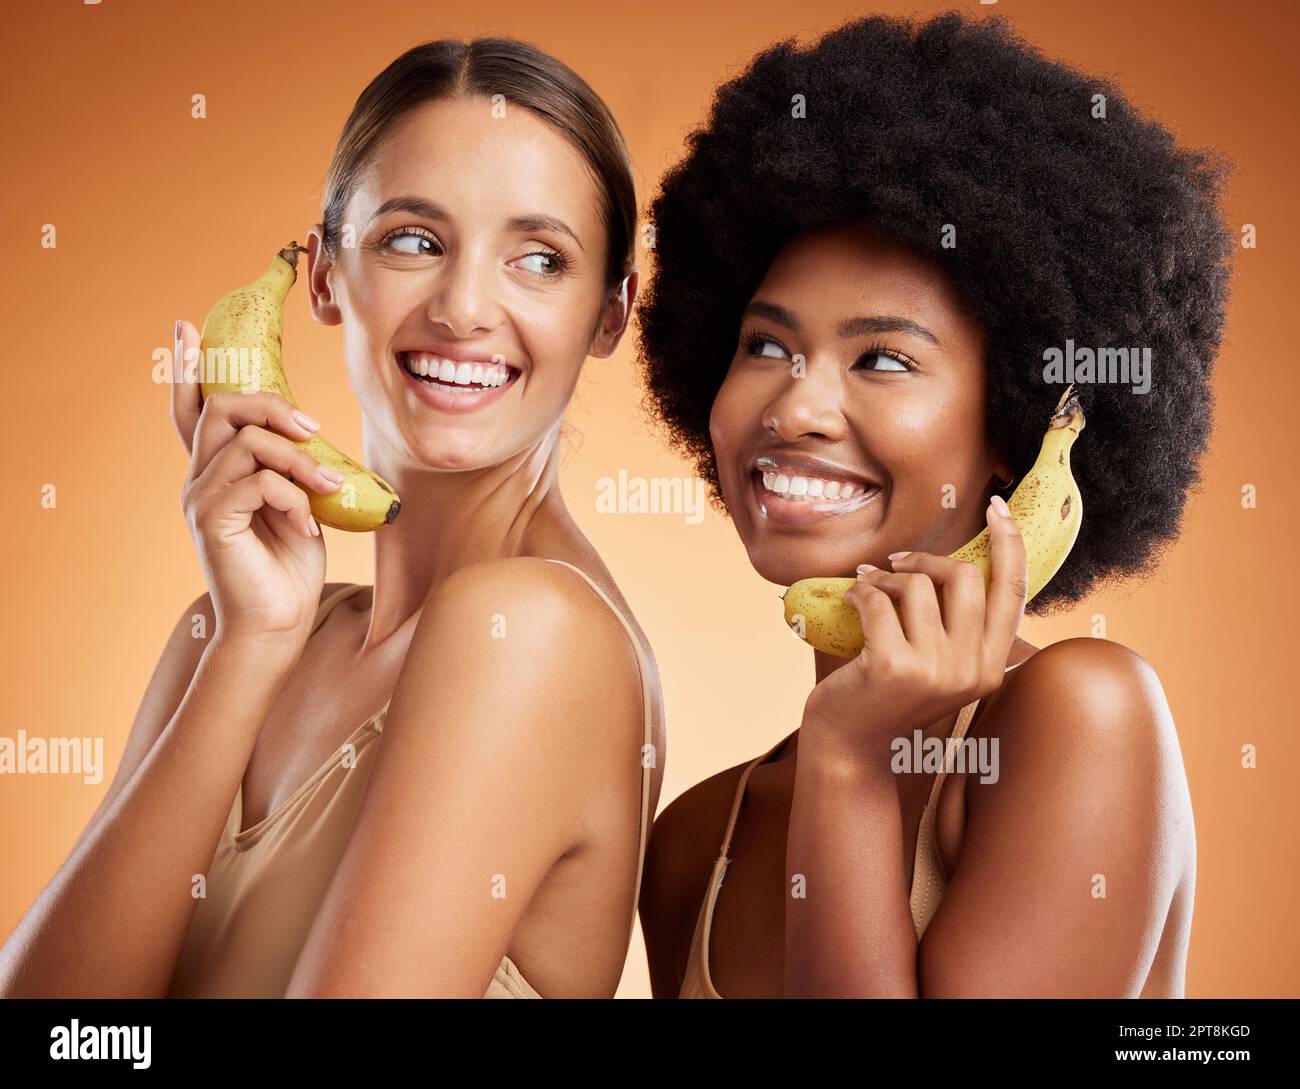 Beauty, diversity and women on banana phone, black woman and friend act, smile and fun pretending to be on phone call. Playful, friendship and studio Stock Photo